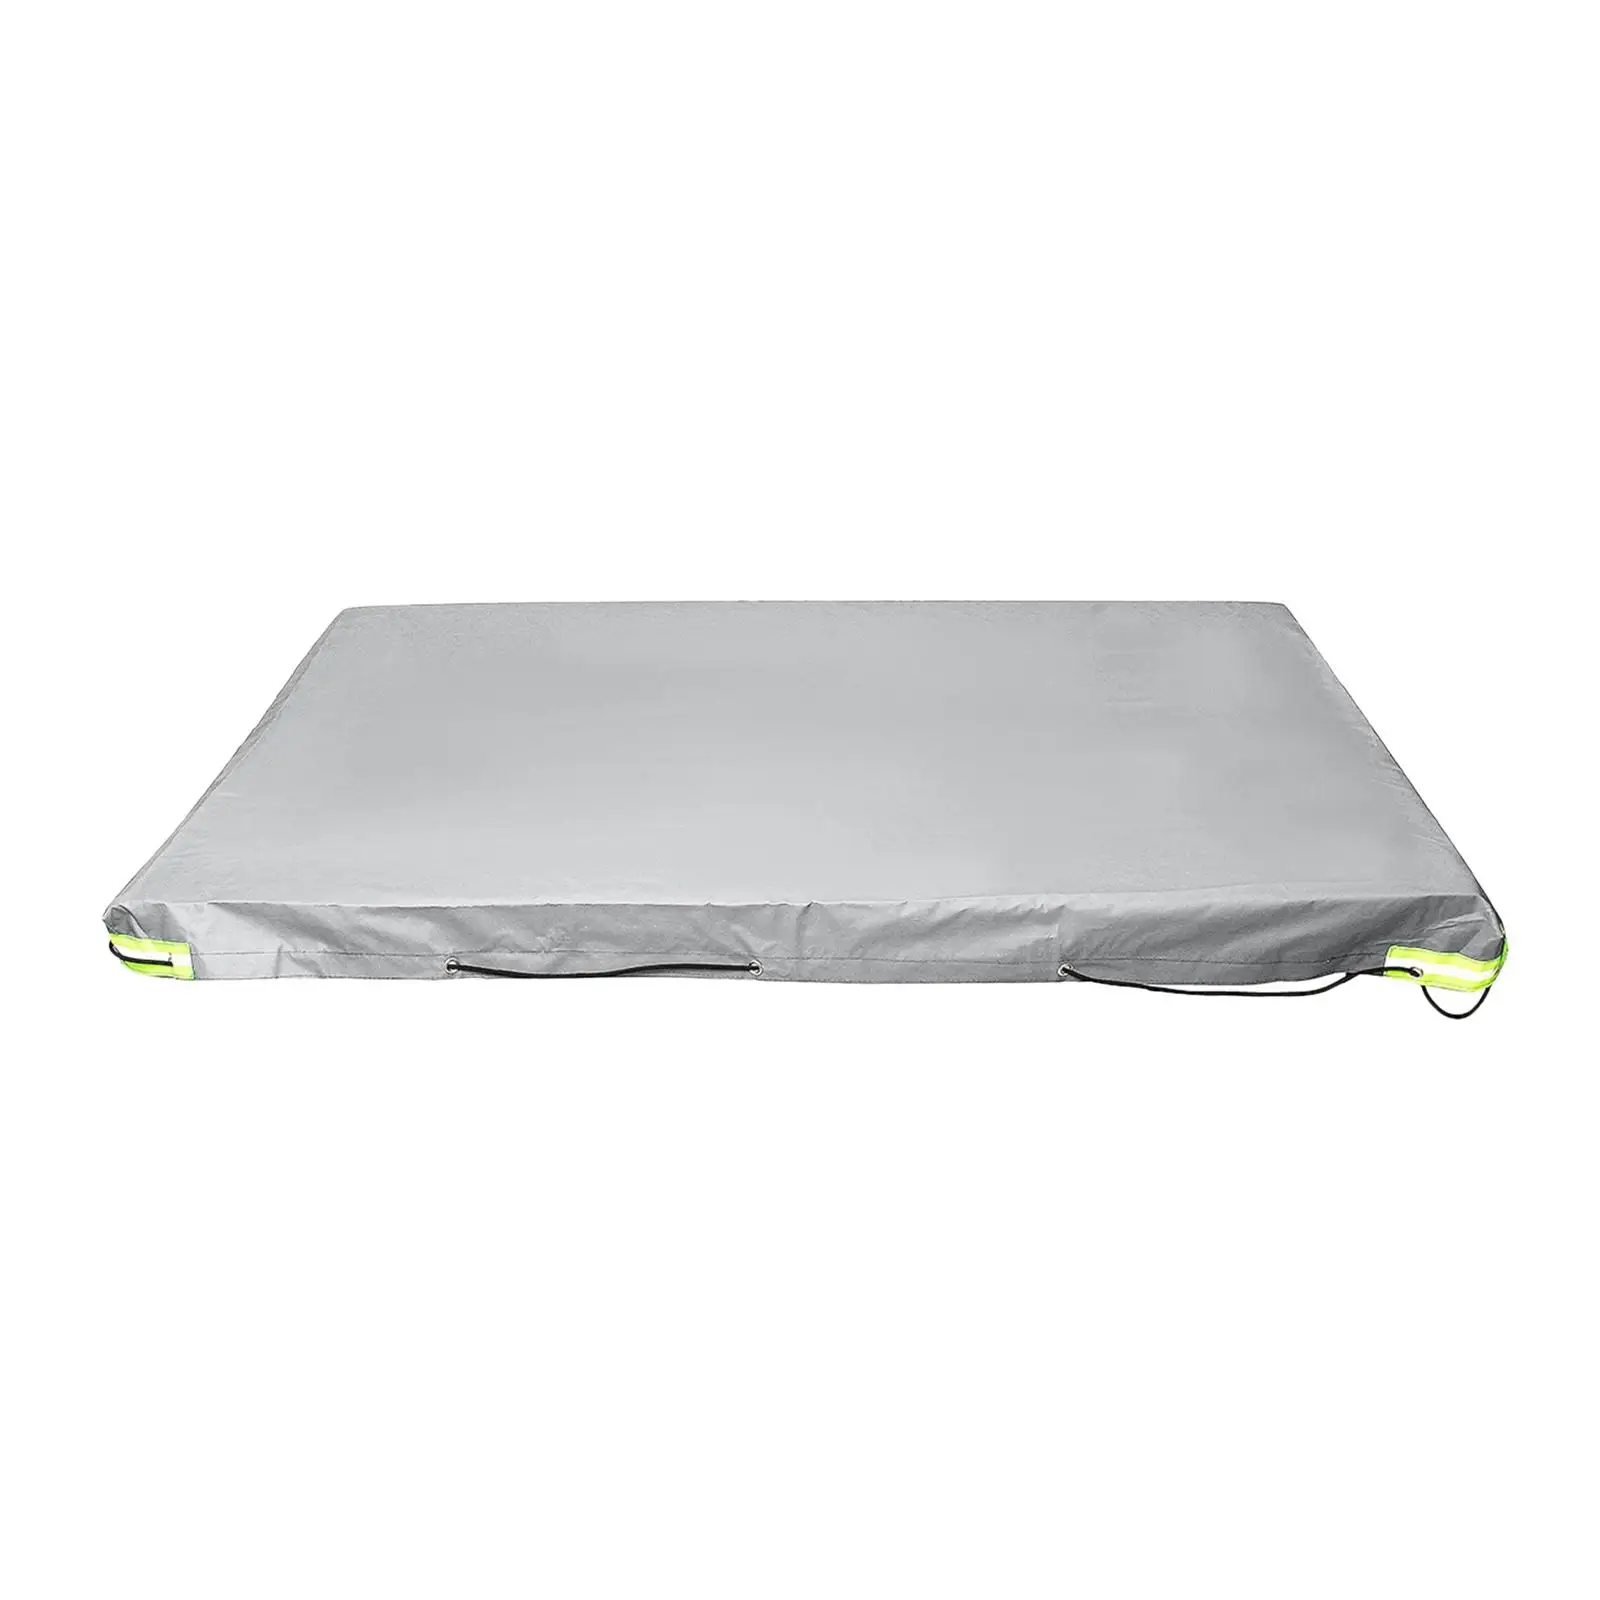 Trailer Cover Waterproof Dustproof PVC Canopy Fits for Camping